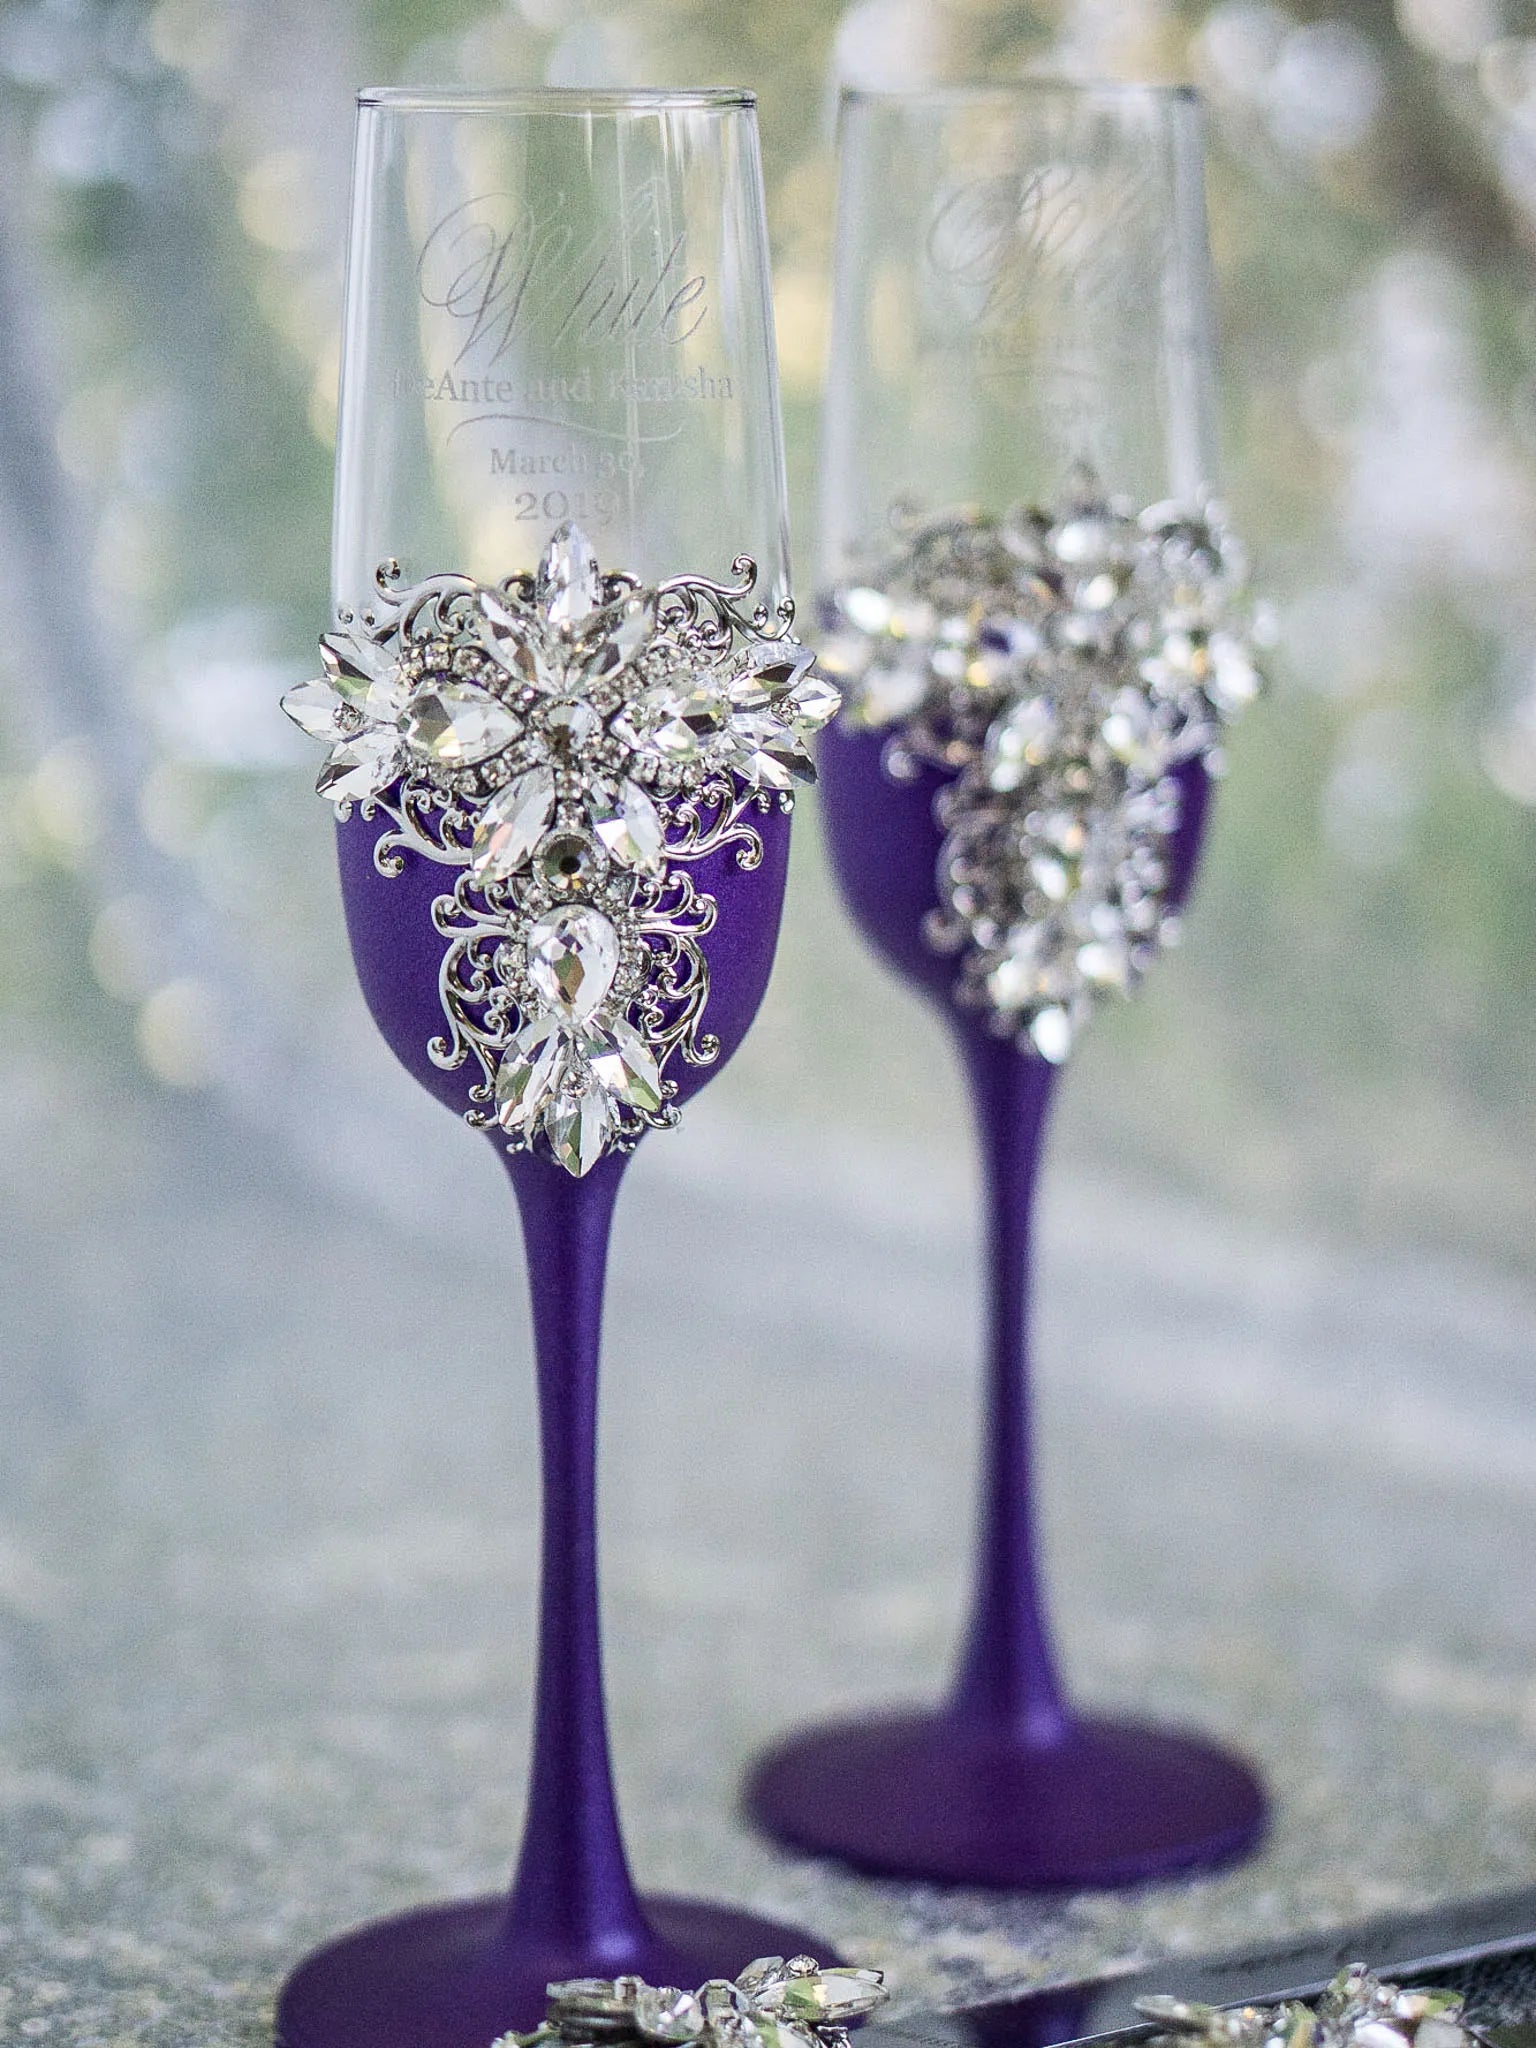 Unique Silver and Plum Purple Crystals Wedding Toast Glasses and Cake Set